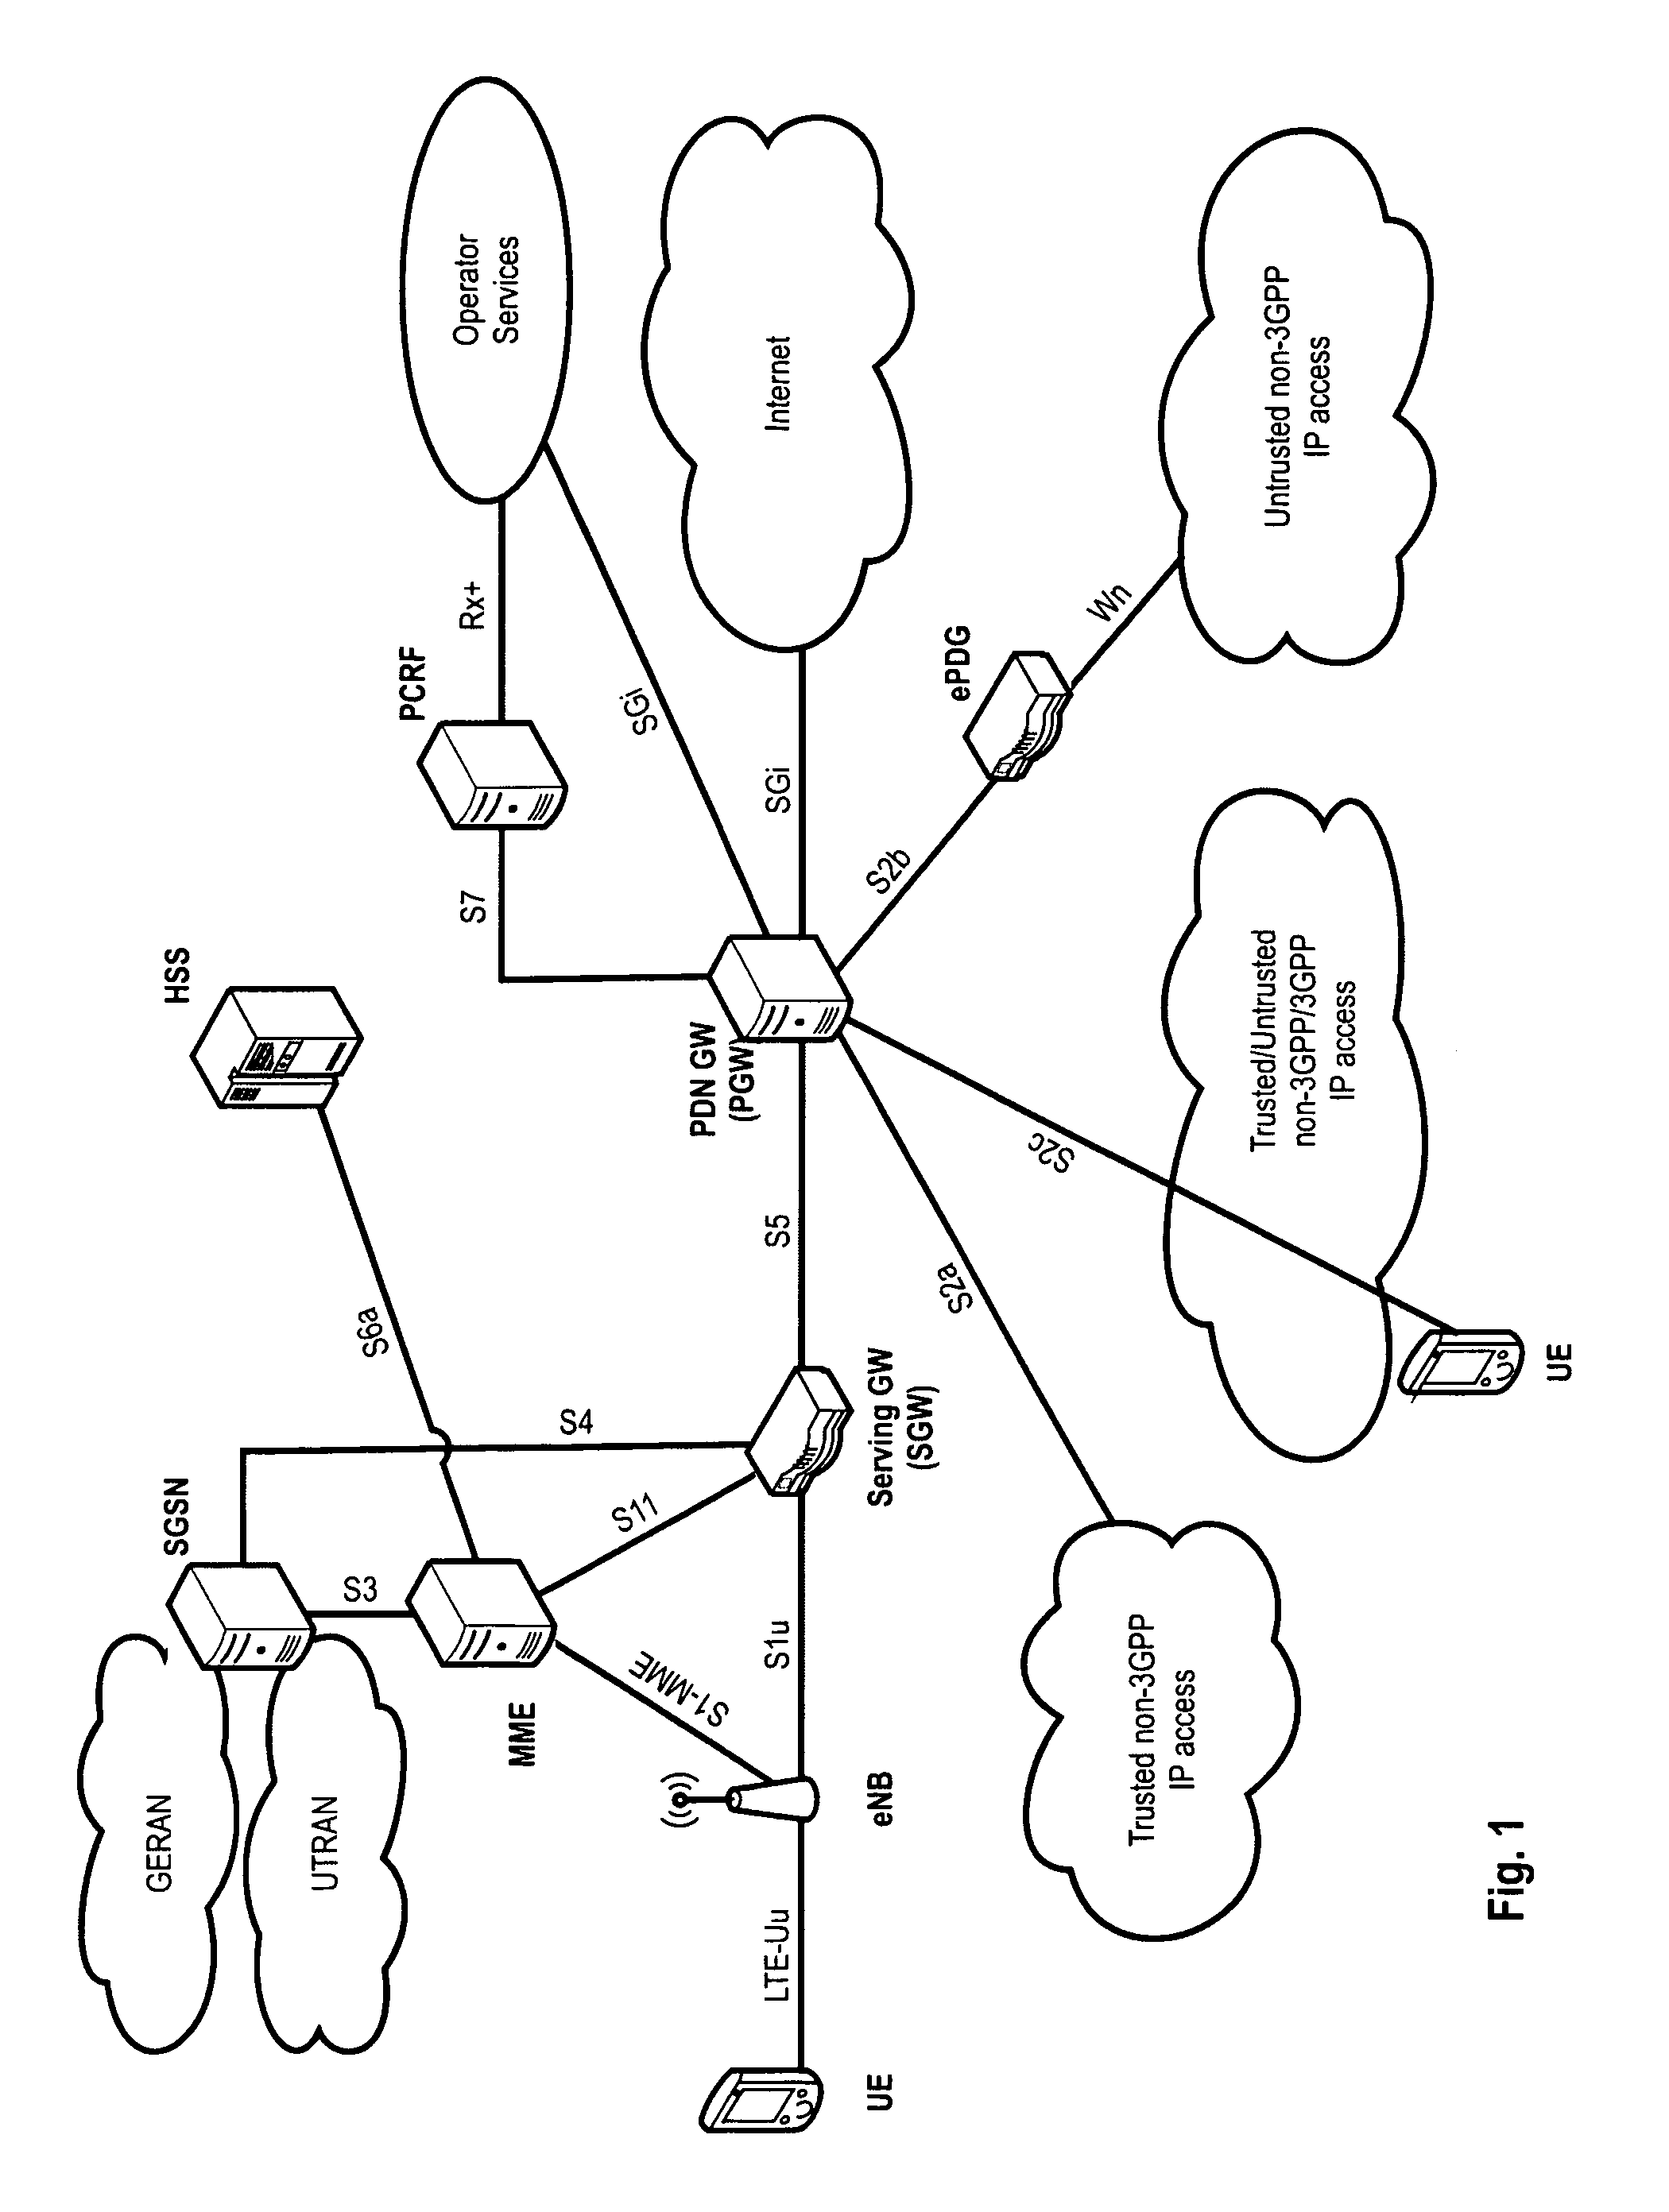 Power-limit reporting in a communication system using carrier aggregation